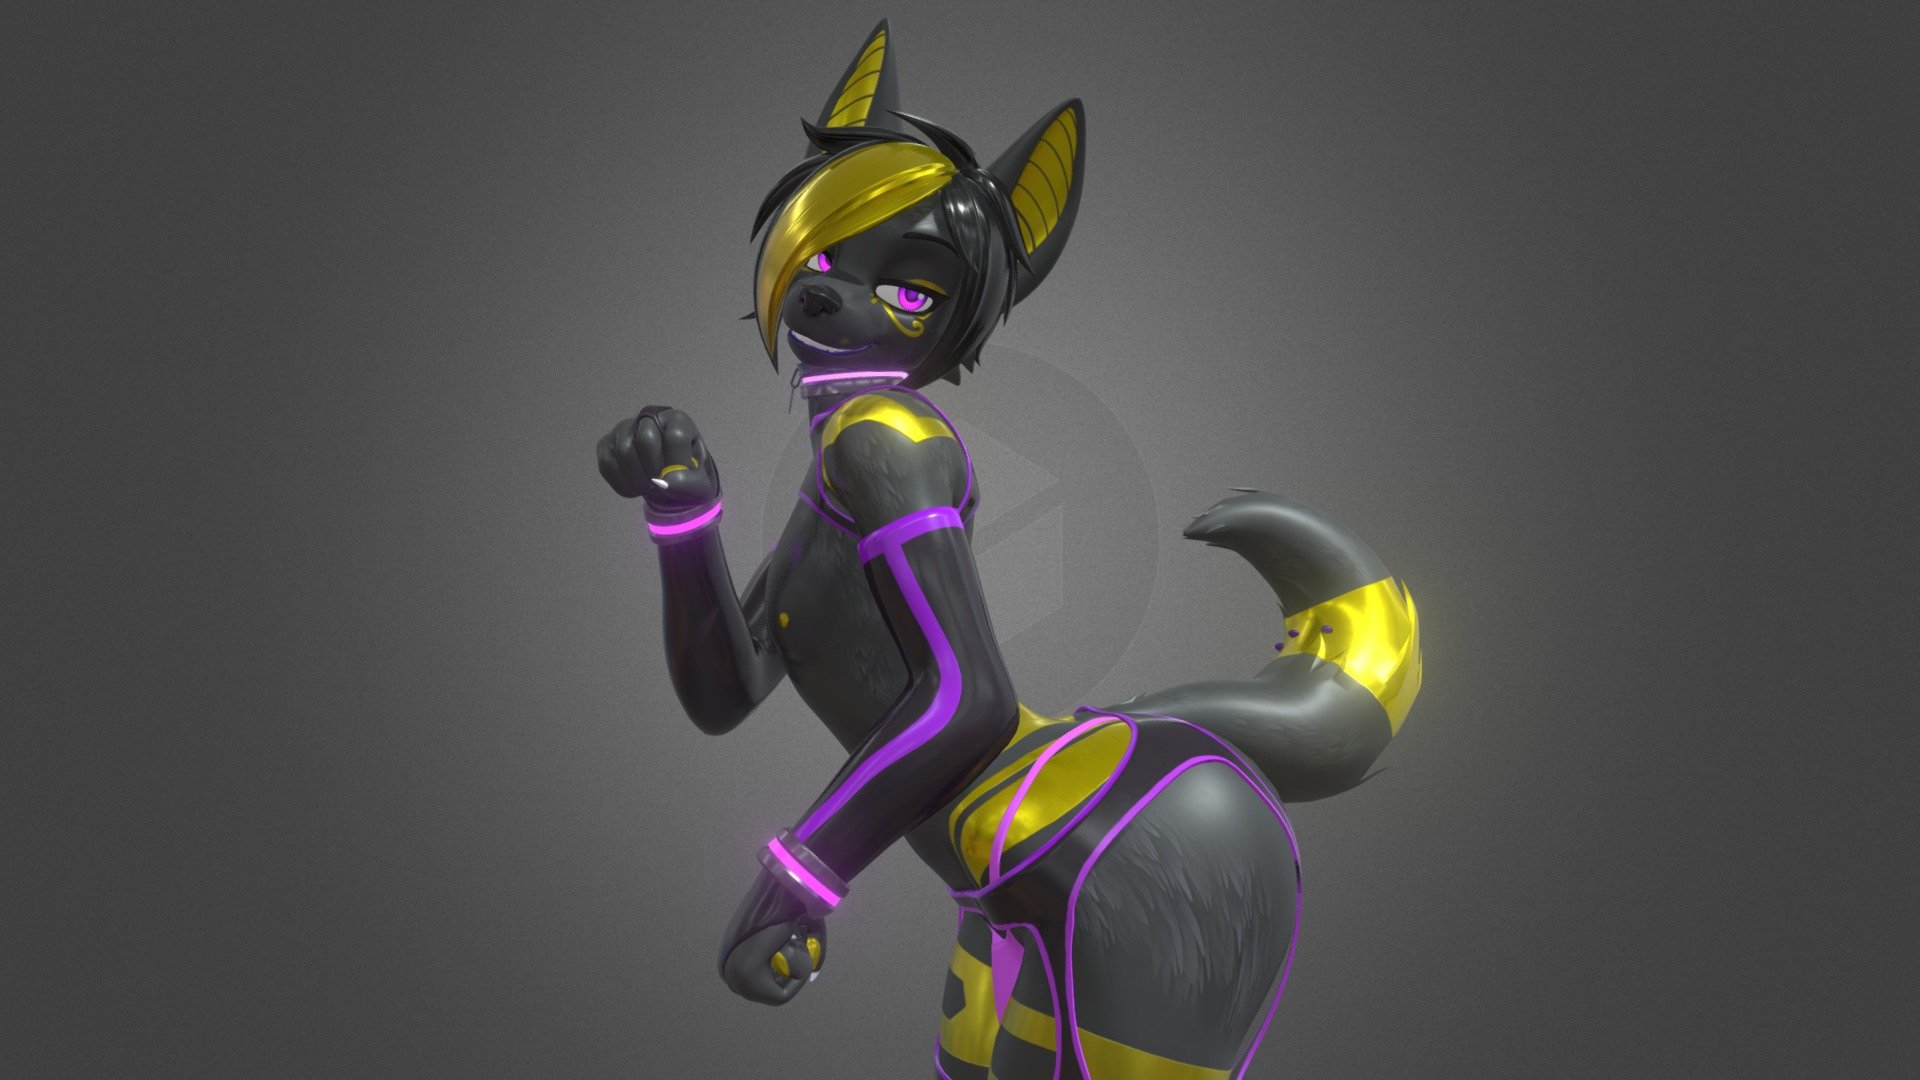 A Blender commission for fellow Patron Zappaeryan
if you're interested in picking up a Blender commission check out my Patreon linked in my Bio! - Zapaeryan Blender Commission - 3D model by kayla fox (@kaylafox) 3d model